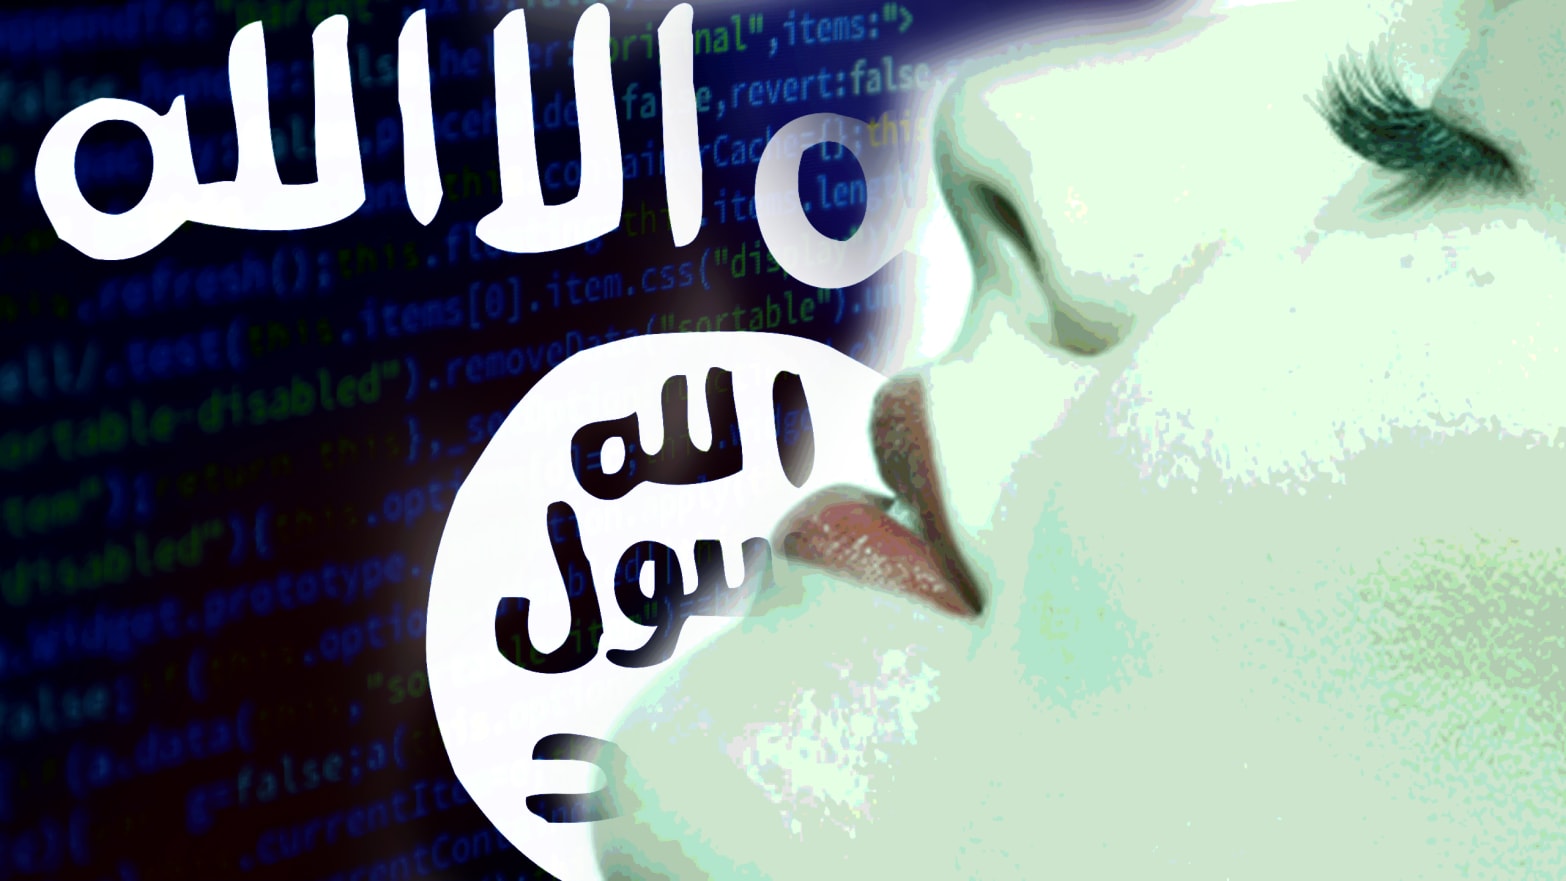 Wigat Sex Viedos Www - They Planted Porn in ISIS Propaganda, Just for Starters, Then Sowed Chaos  and Confusion in the 'Caliphate'